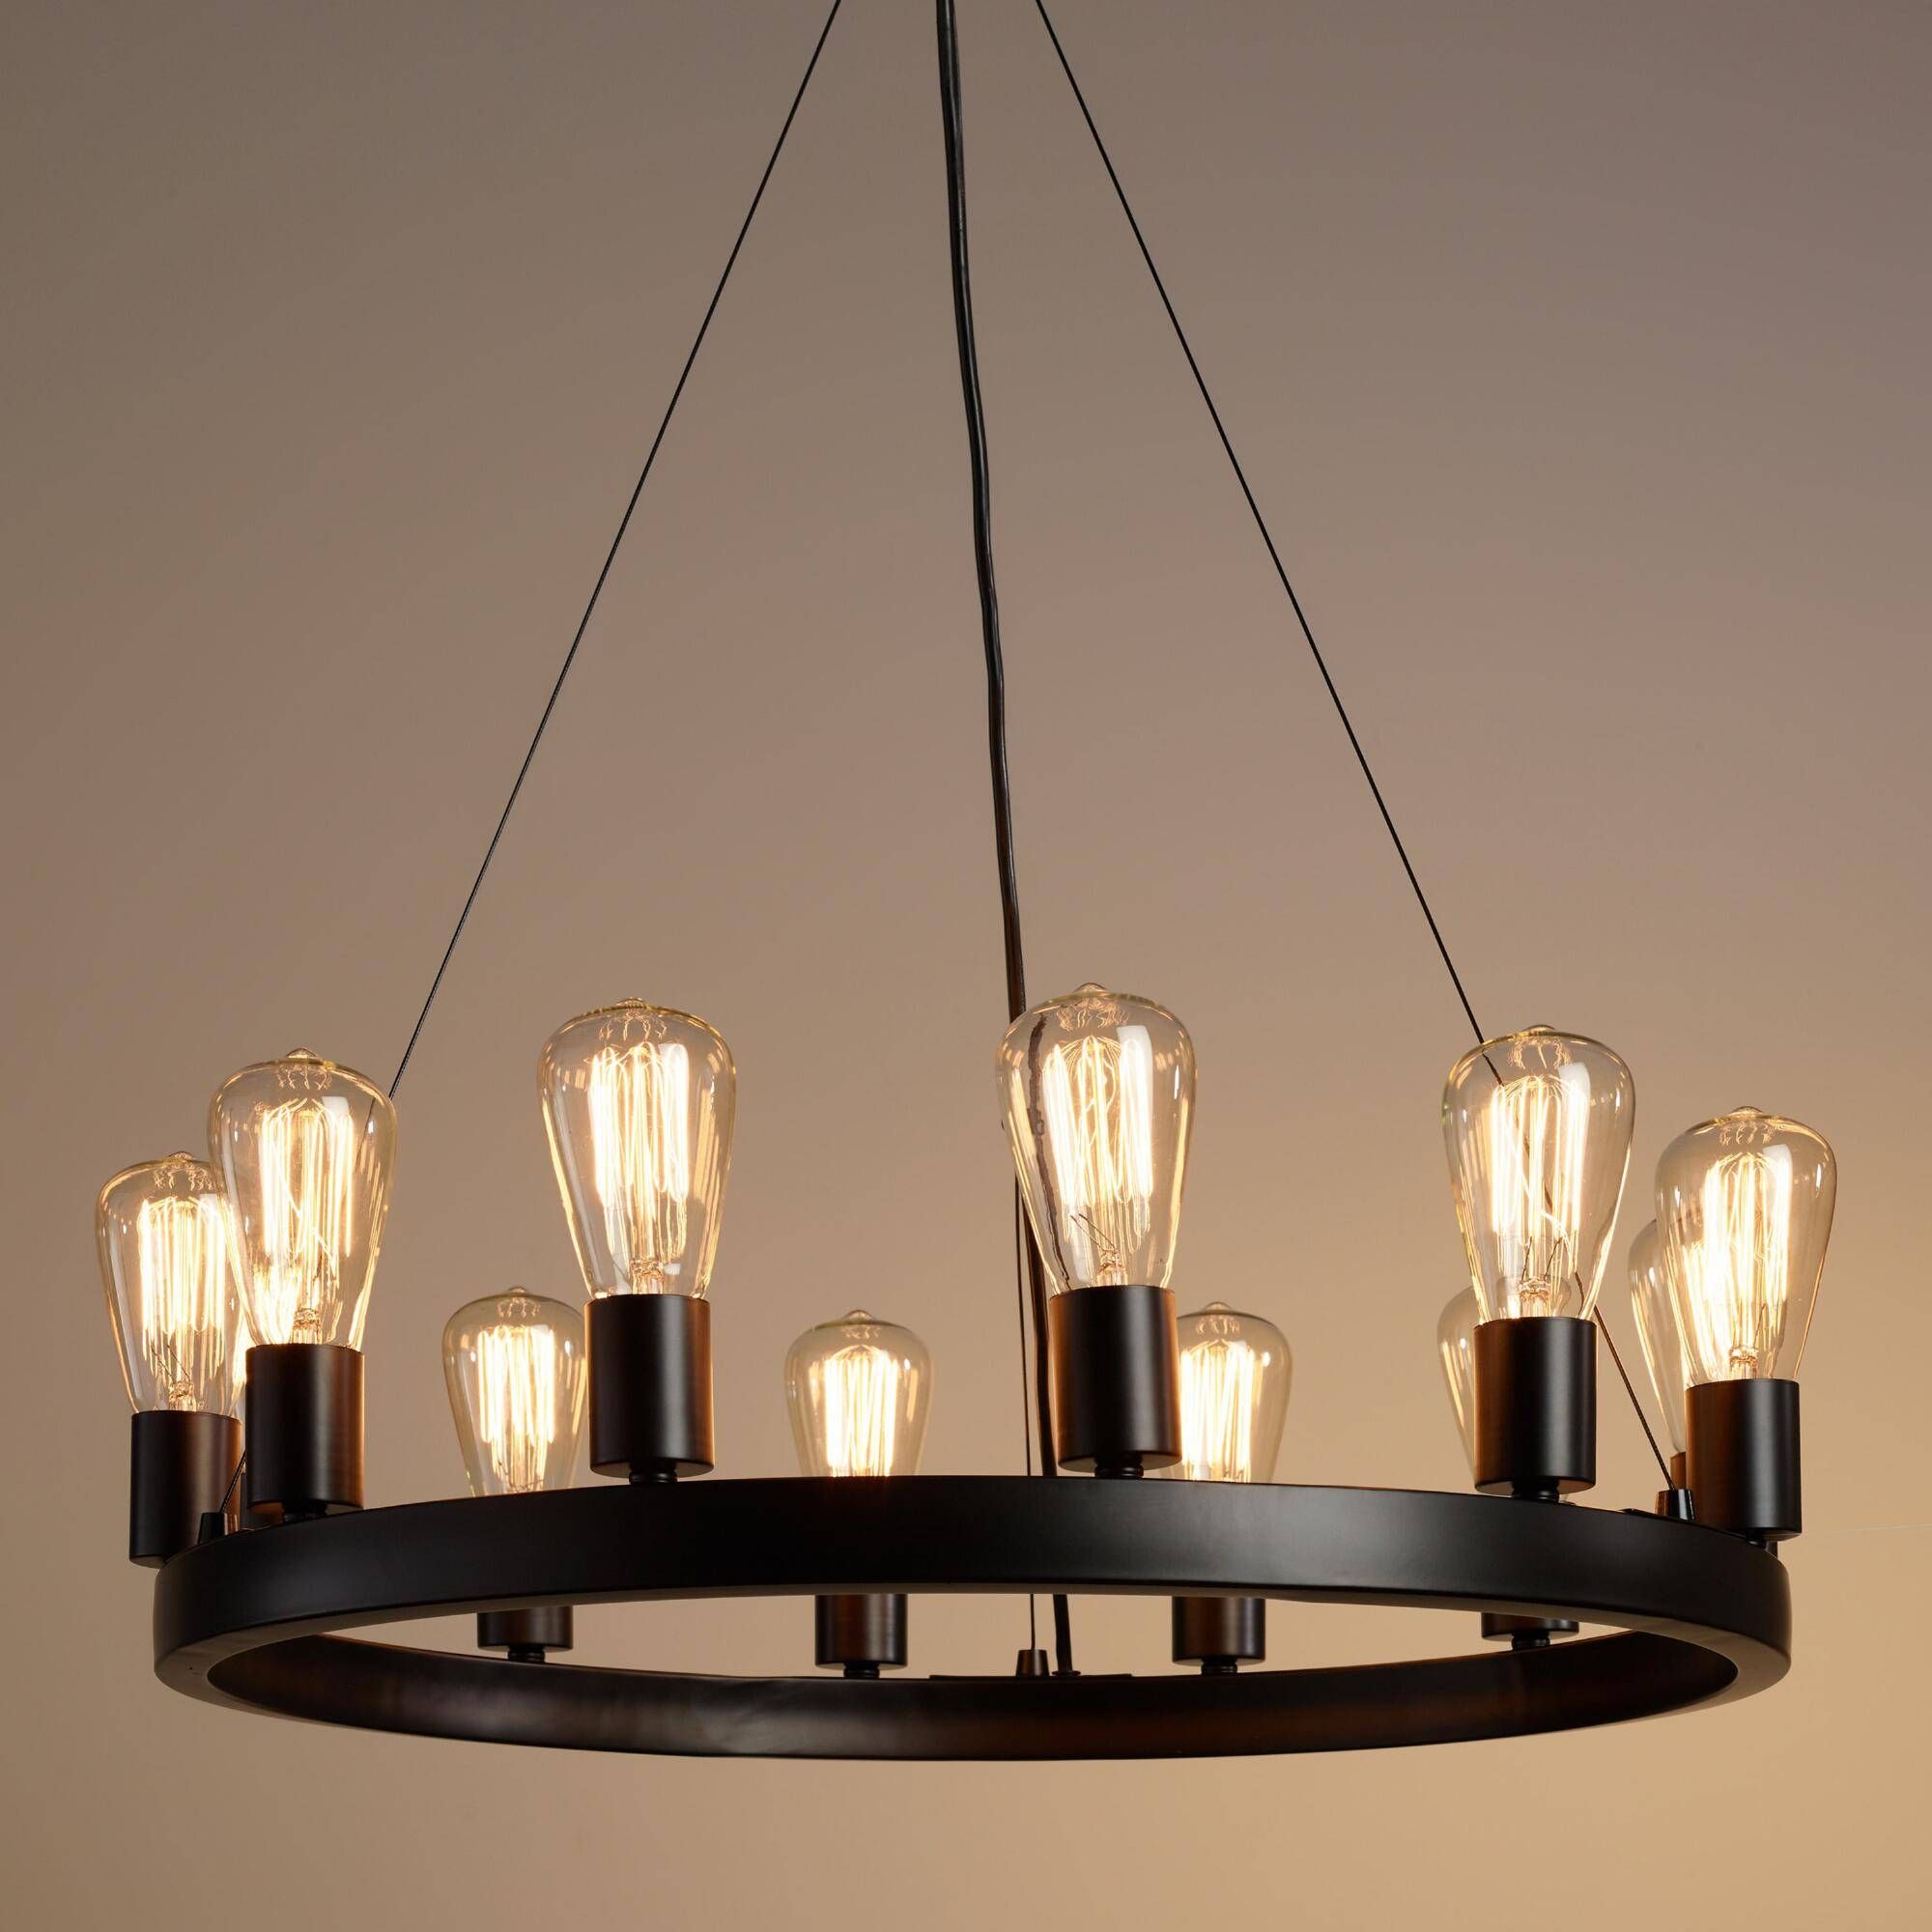 Chandeliers Design : Fabulous Amazing Round Light Edison Bulb Intended For Glass Pendant Lights With Edison Bulbs (Photo 12 of 15)